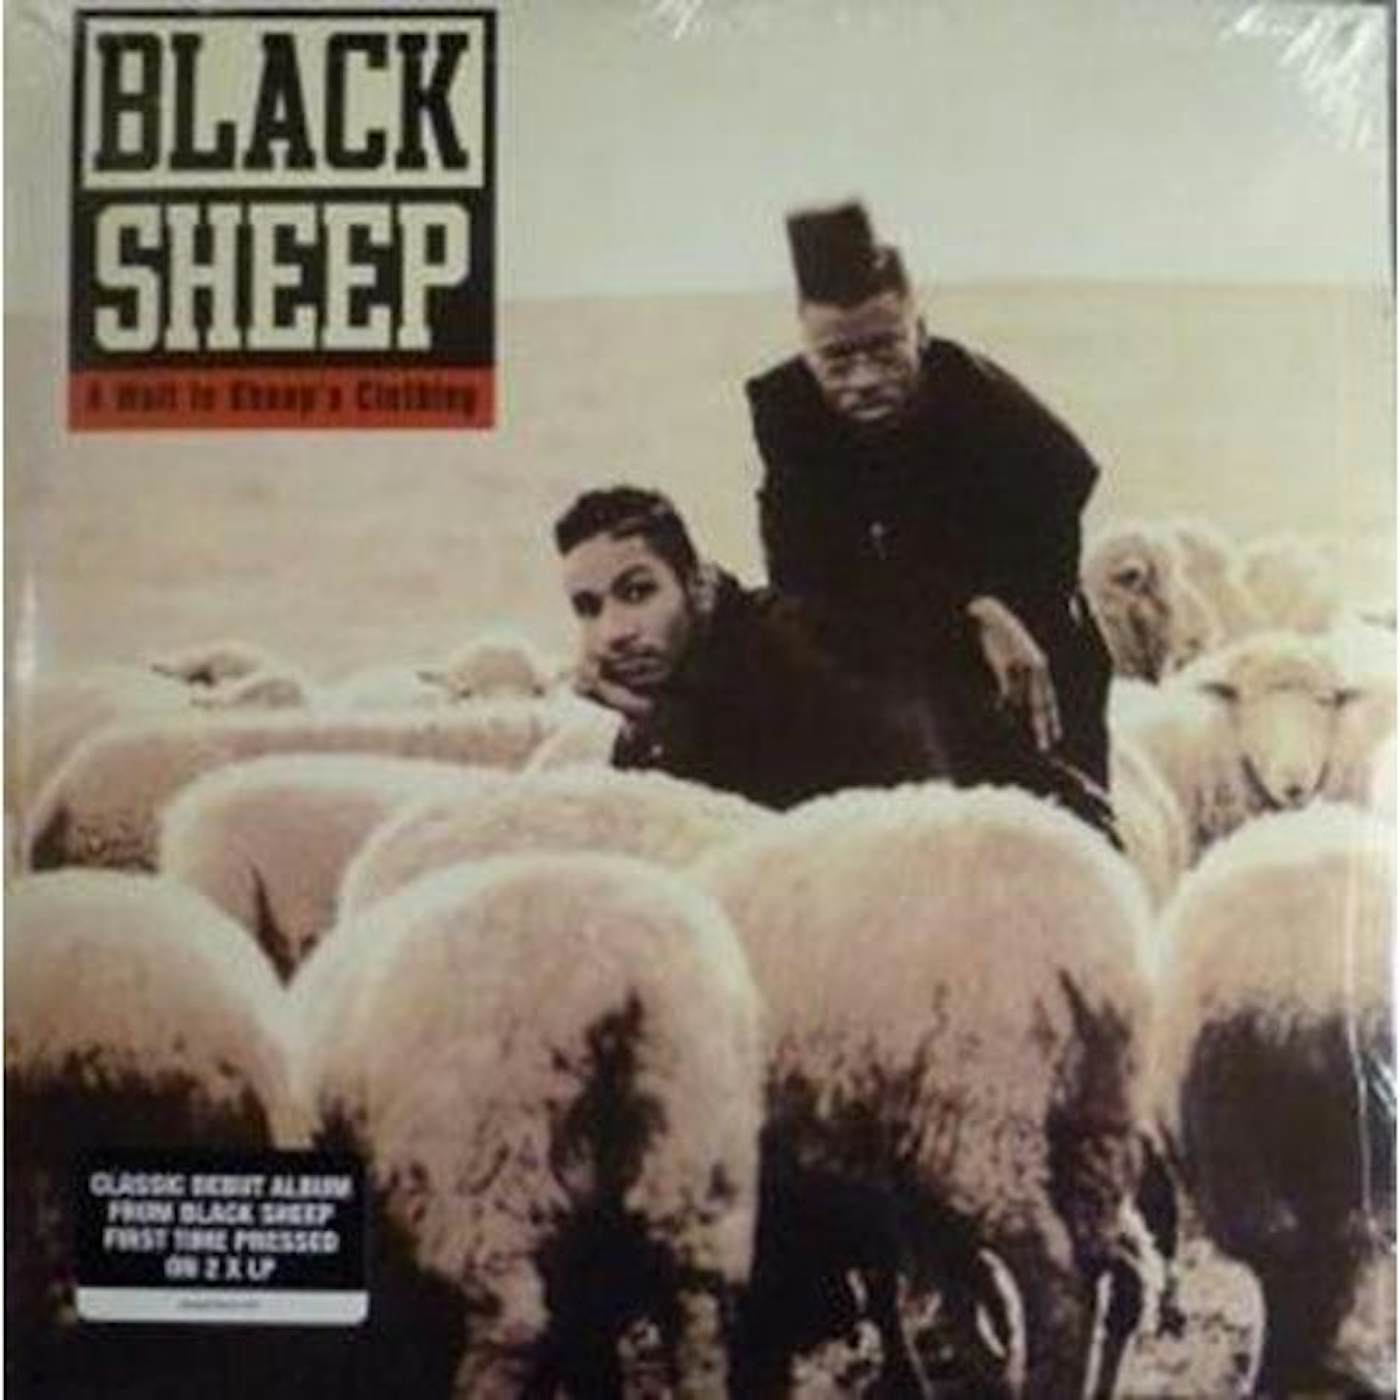 Black Sheep A Wolf In Sheep's Clothing Vinyl Record